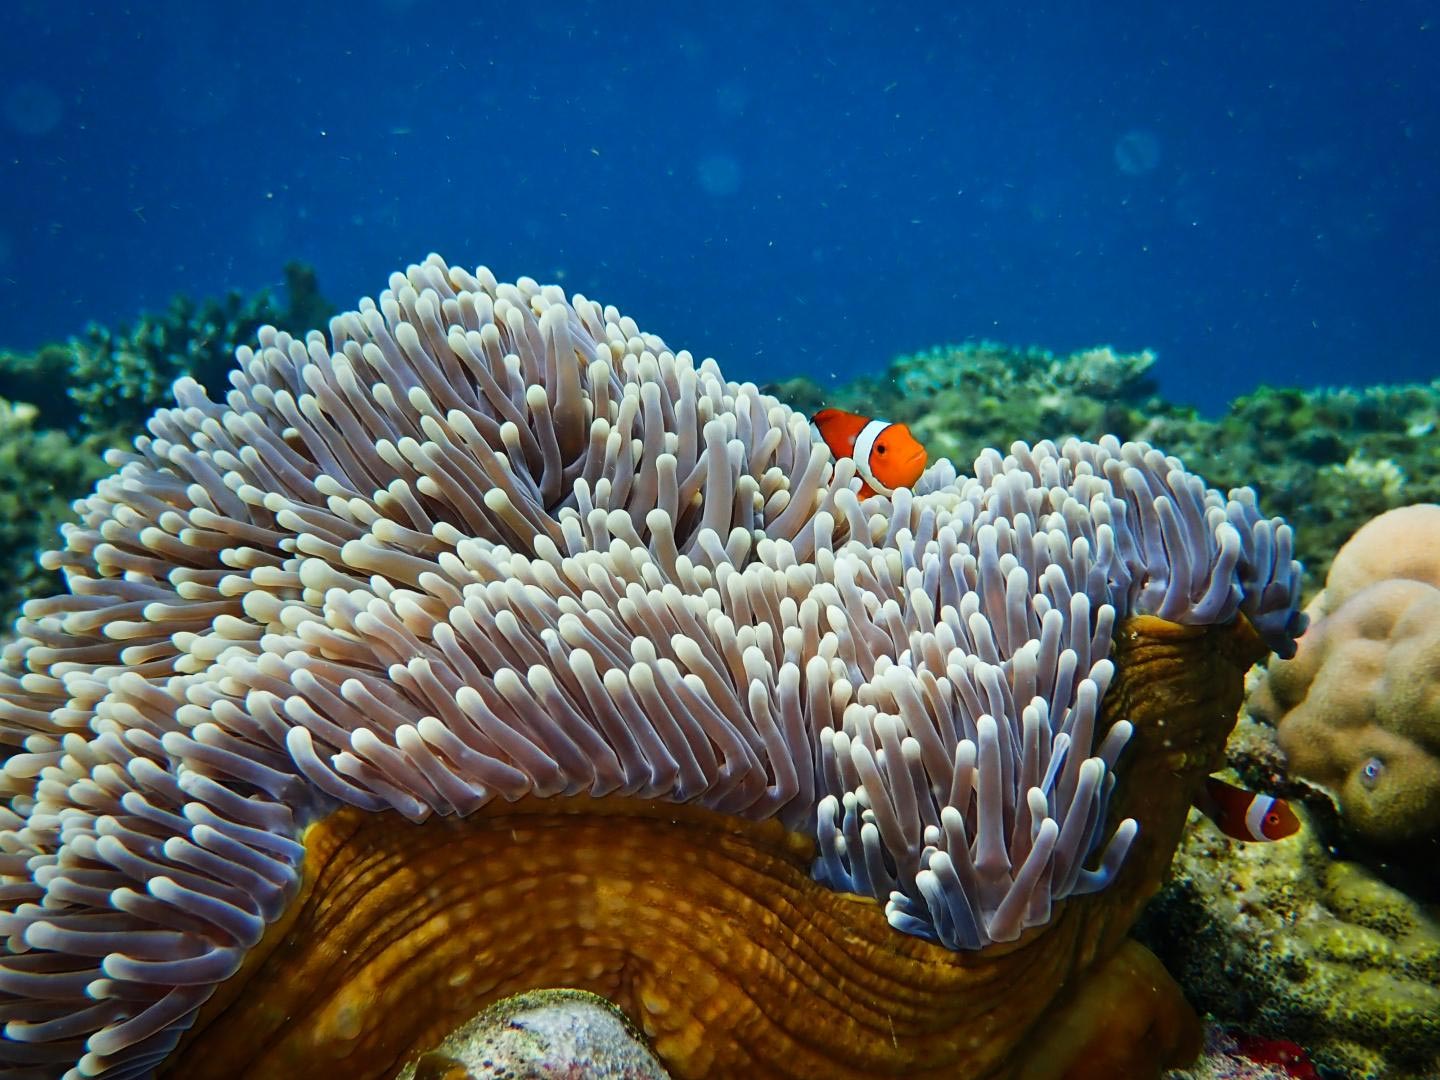 Coral Reefs and Sea Anemones